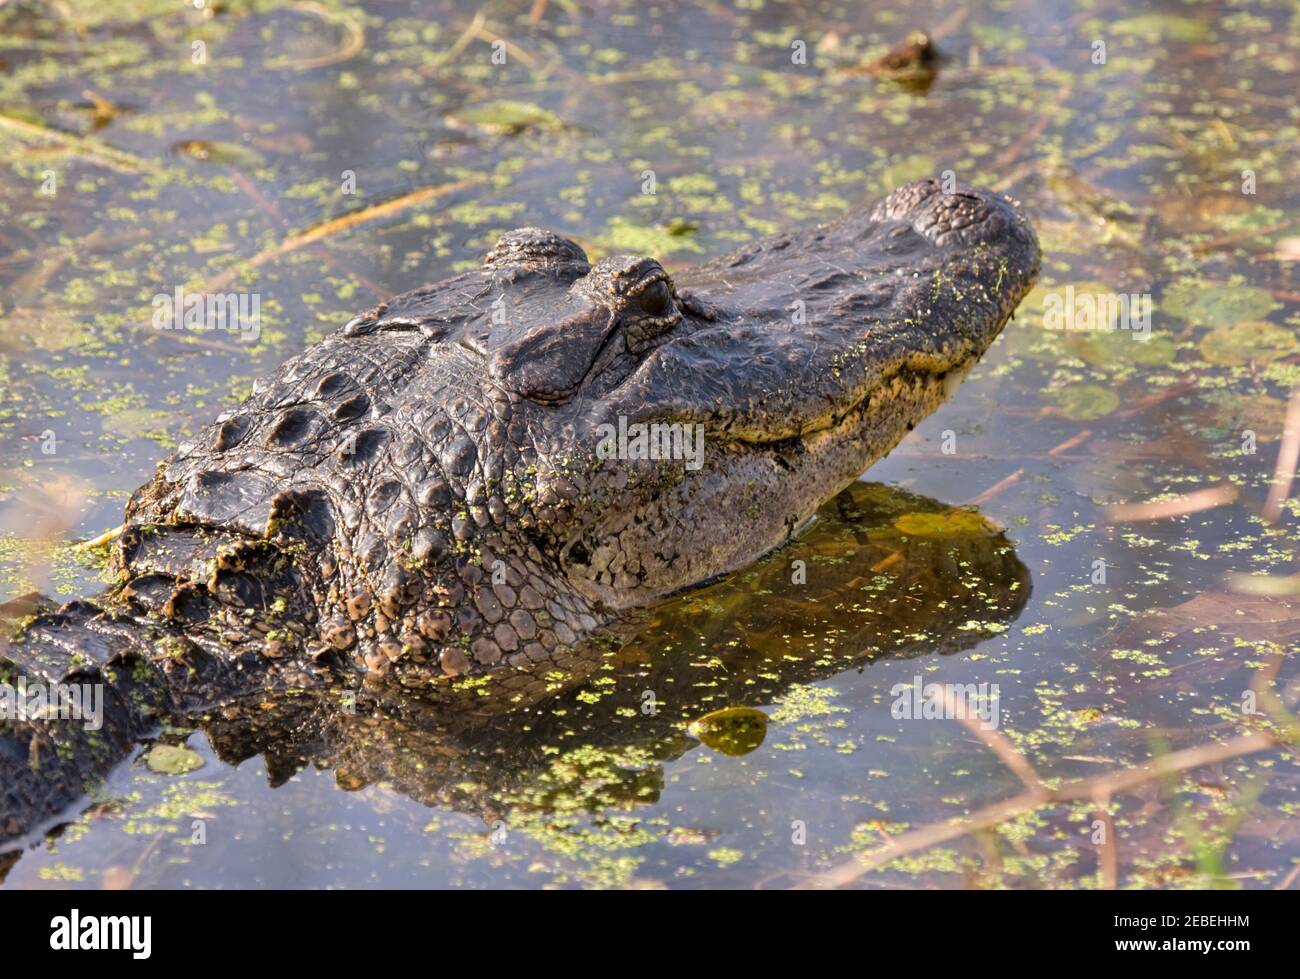 A small American alligator lifts its head out of the water at Brazos Bend State Park in Texas.  Alligators are considered an apex predator. Stock Photo